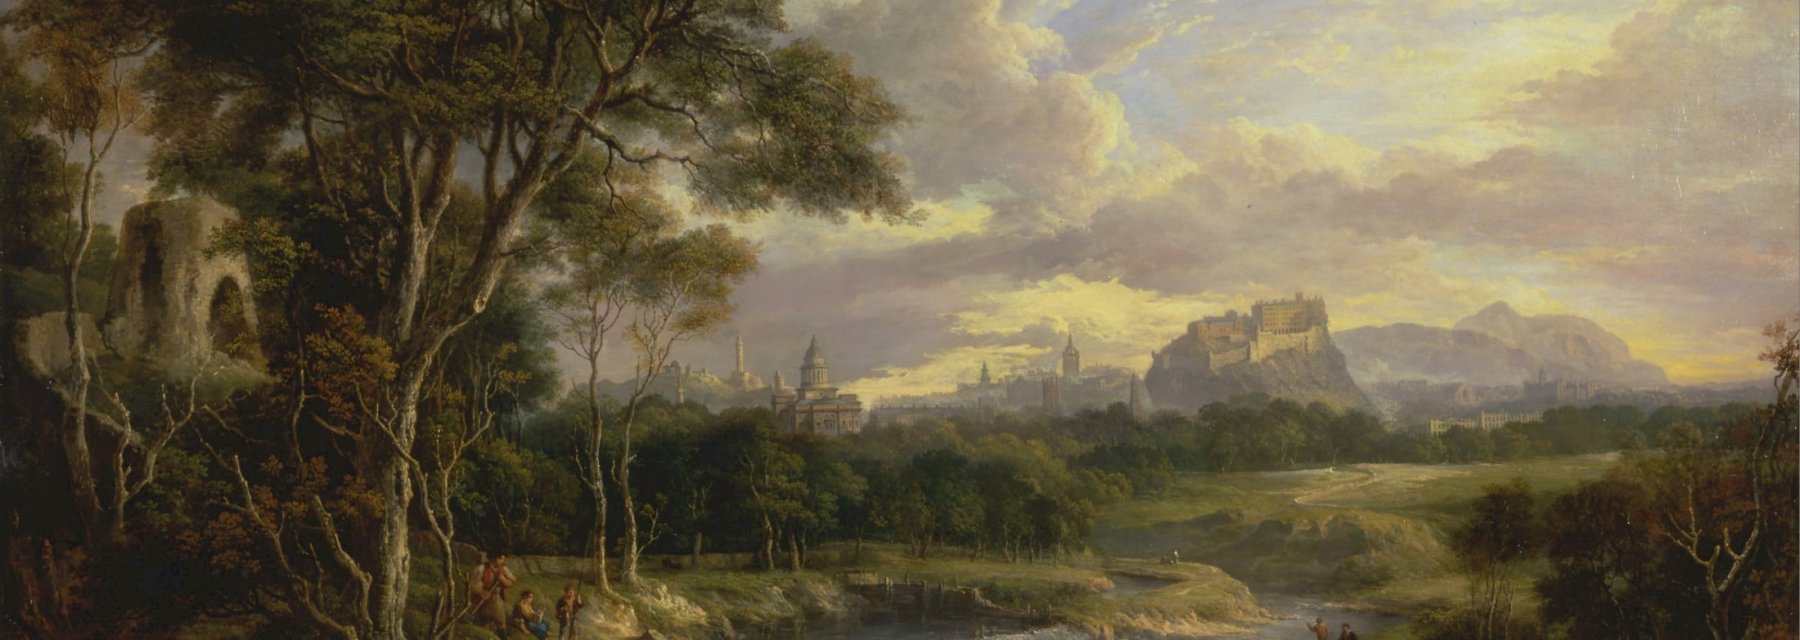 The most famous Romanticism paintings you need to know